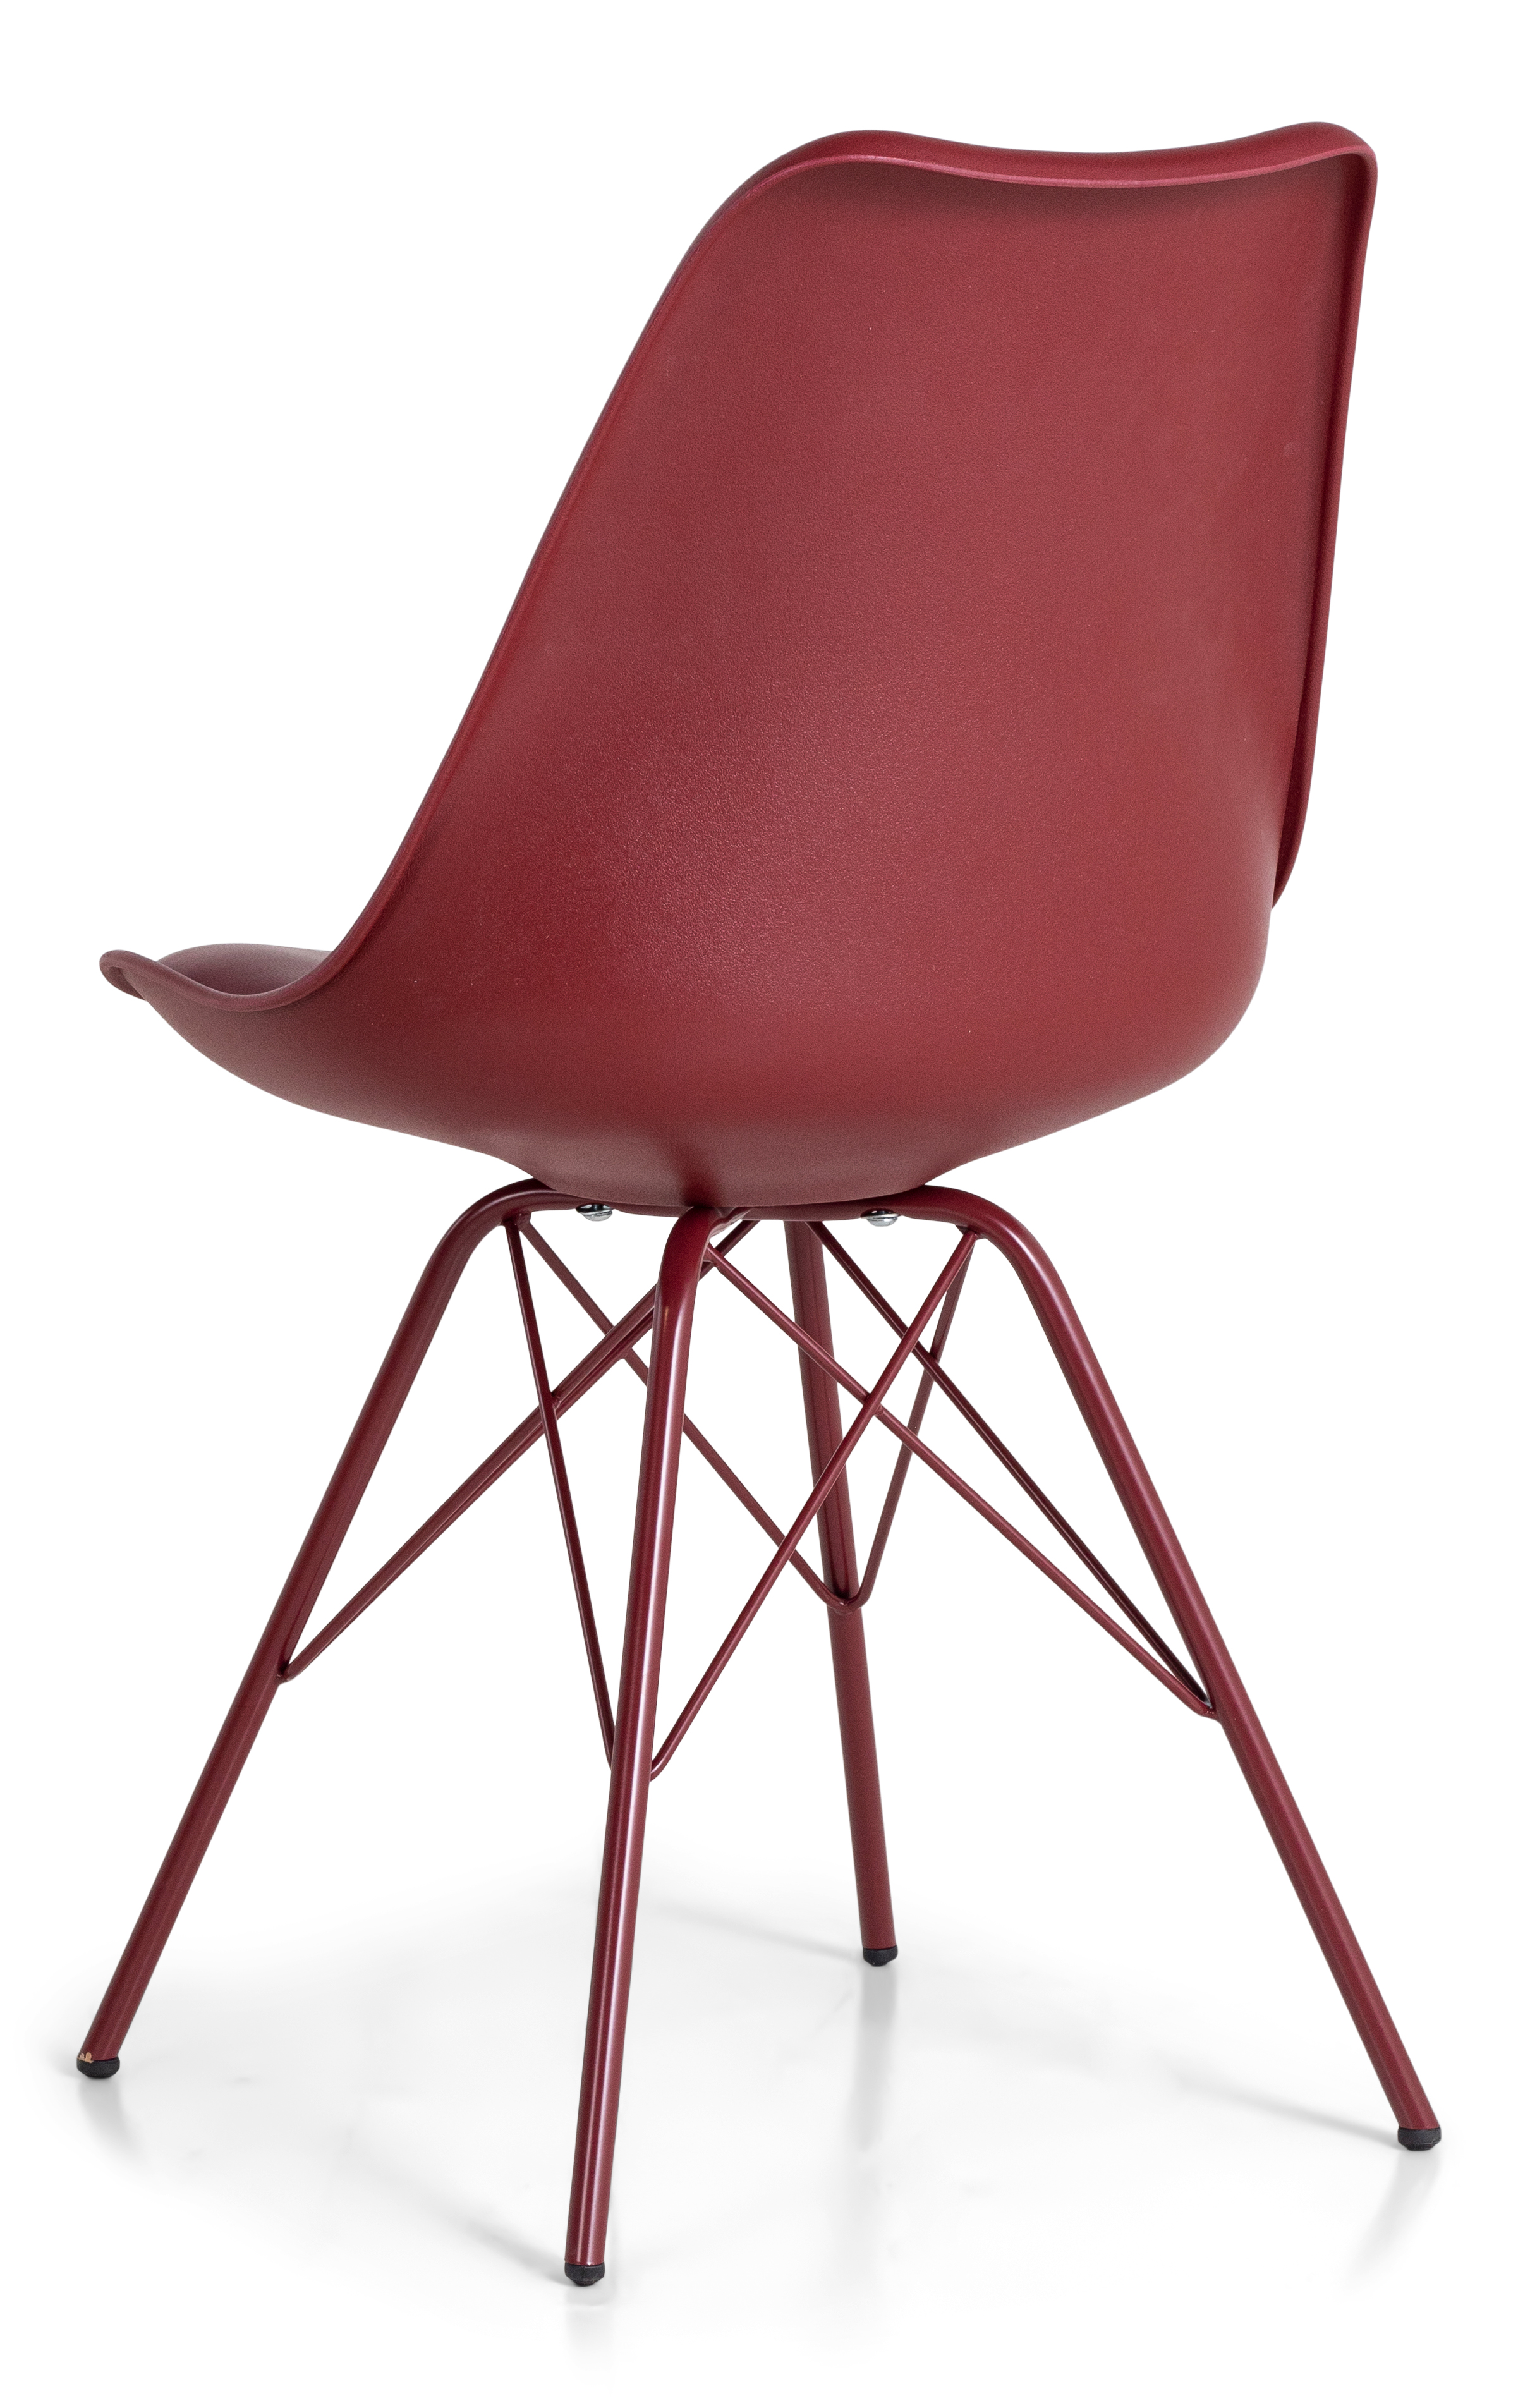 EMMA DINING CHAIR RED 50 X 87.50 X 57CM